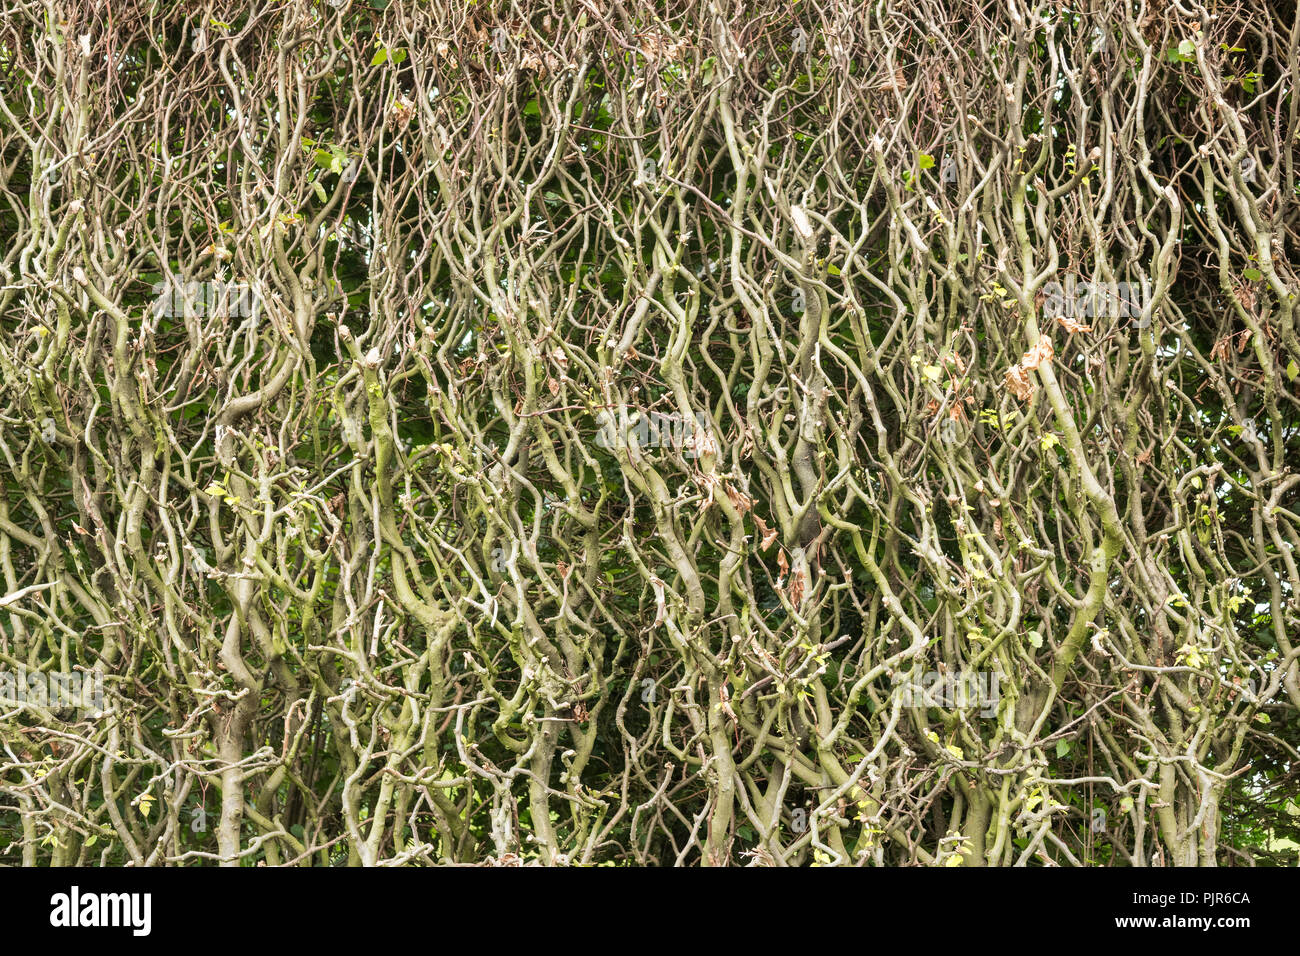 Beech hedge  - fagus sylvatica - cut back hard in summer to reduce thickness - uk Stock Photo